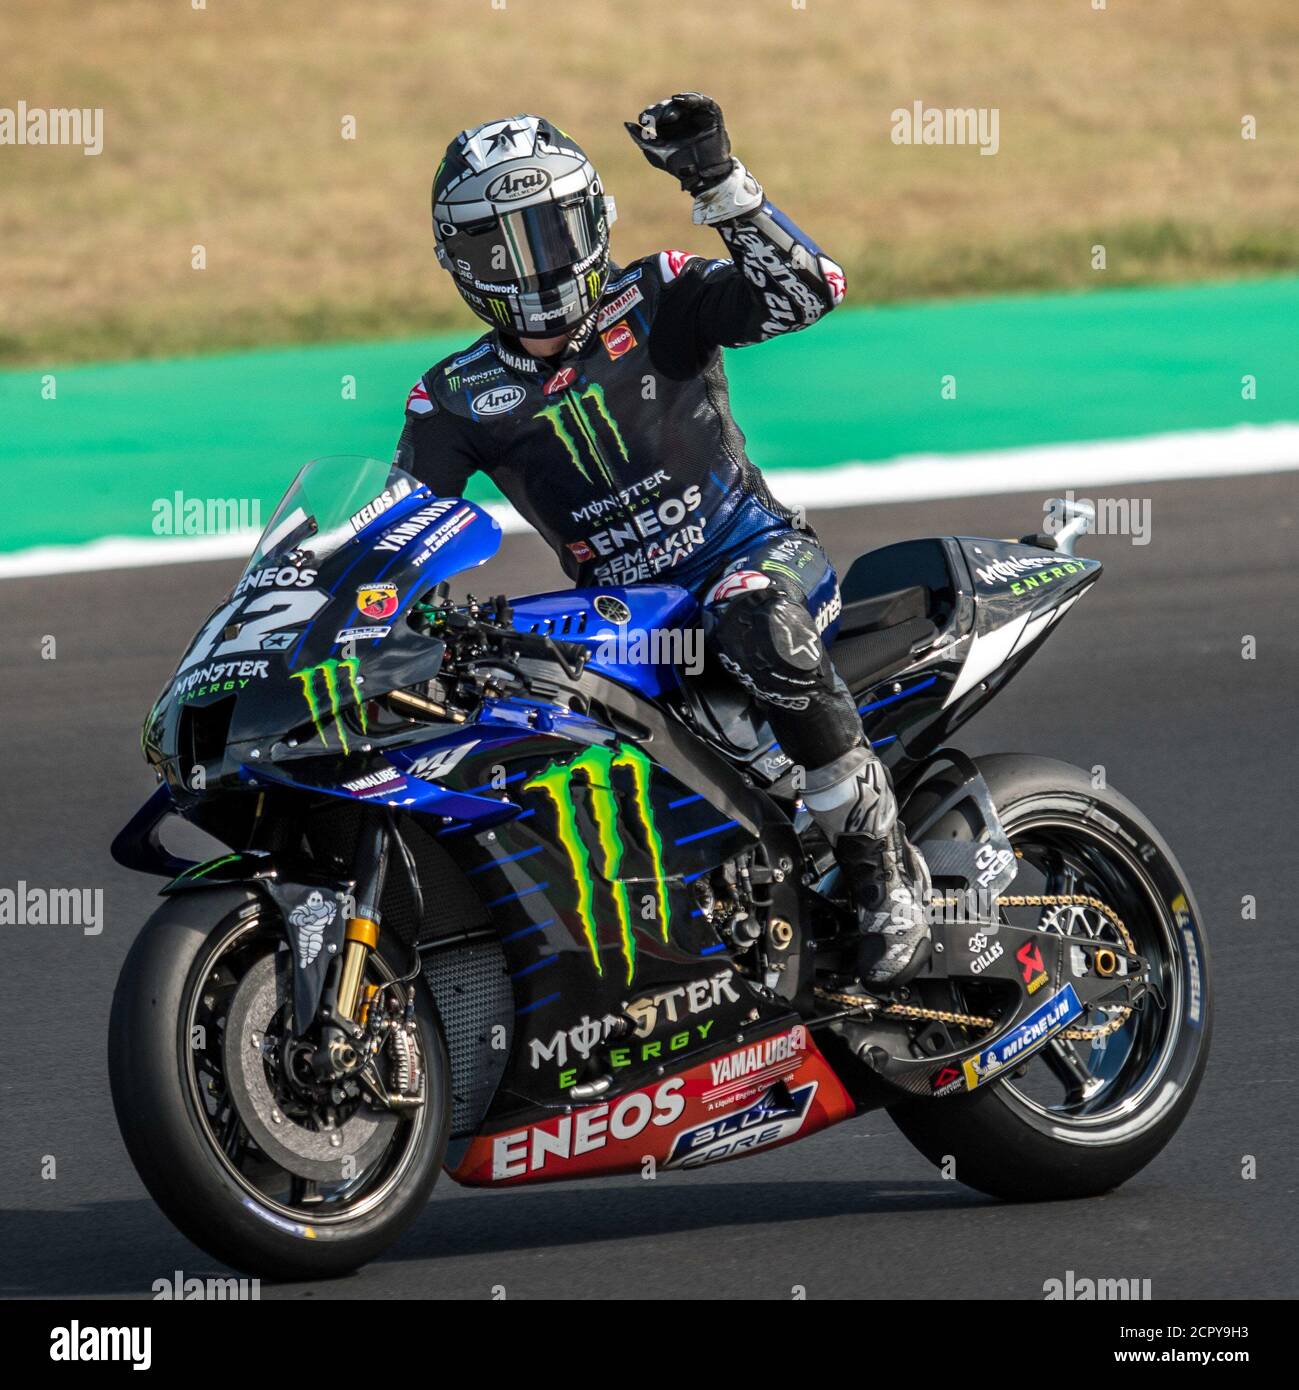 Santa Monica-Cella, Italy. 19th Sep, 2020. MAVERICK VINALES waves after setting the fastest for the second straight week in MotoGP qualifying. The Monster Energy-Yamaha rider will start on pole for the Emilia-Romagna Grand Prix Sunday at Misano World Circuit Marco Simoncelli. Credit: Alessio Marini/LPS/ZUMA Wire/Alamy Live News Stock Photo